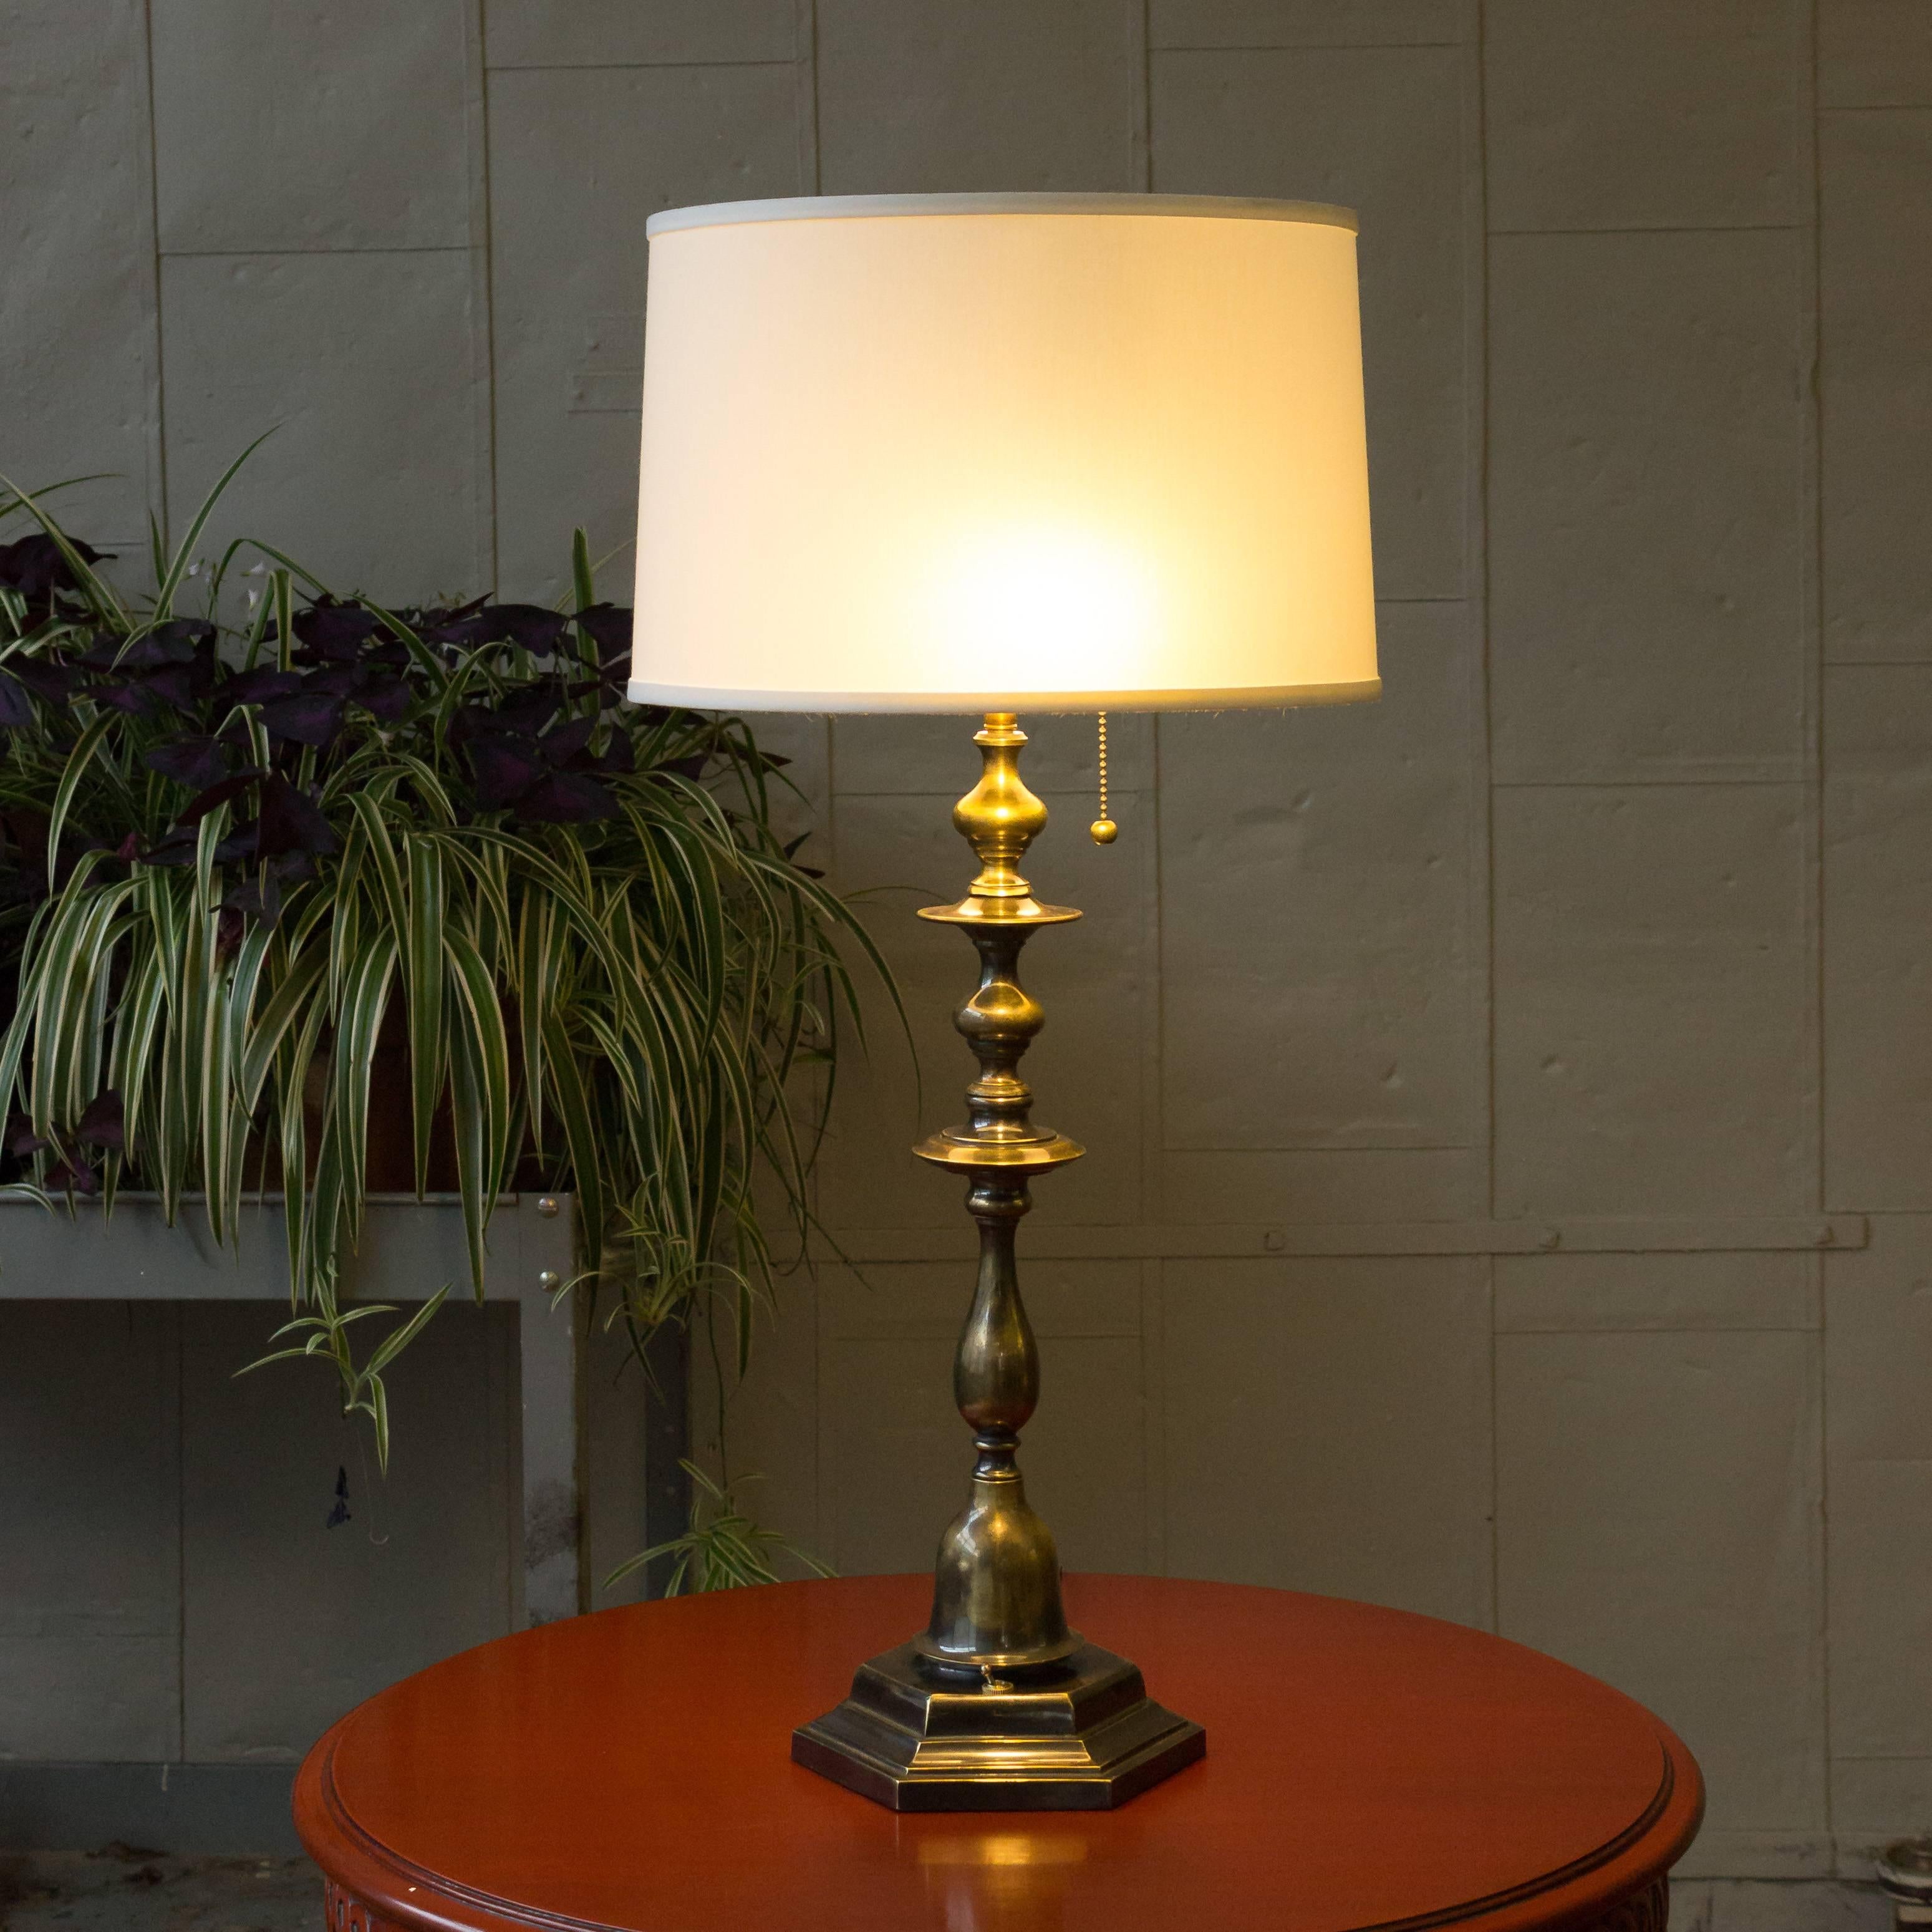 Recently refinished brass table lamp with turned and cast bronze parts. The hand finished finish shows variations in the patina to bring out the age of the piece. The lamps has been rewired with a black silk cord and a double light cluster, shade